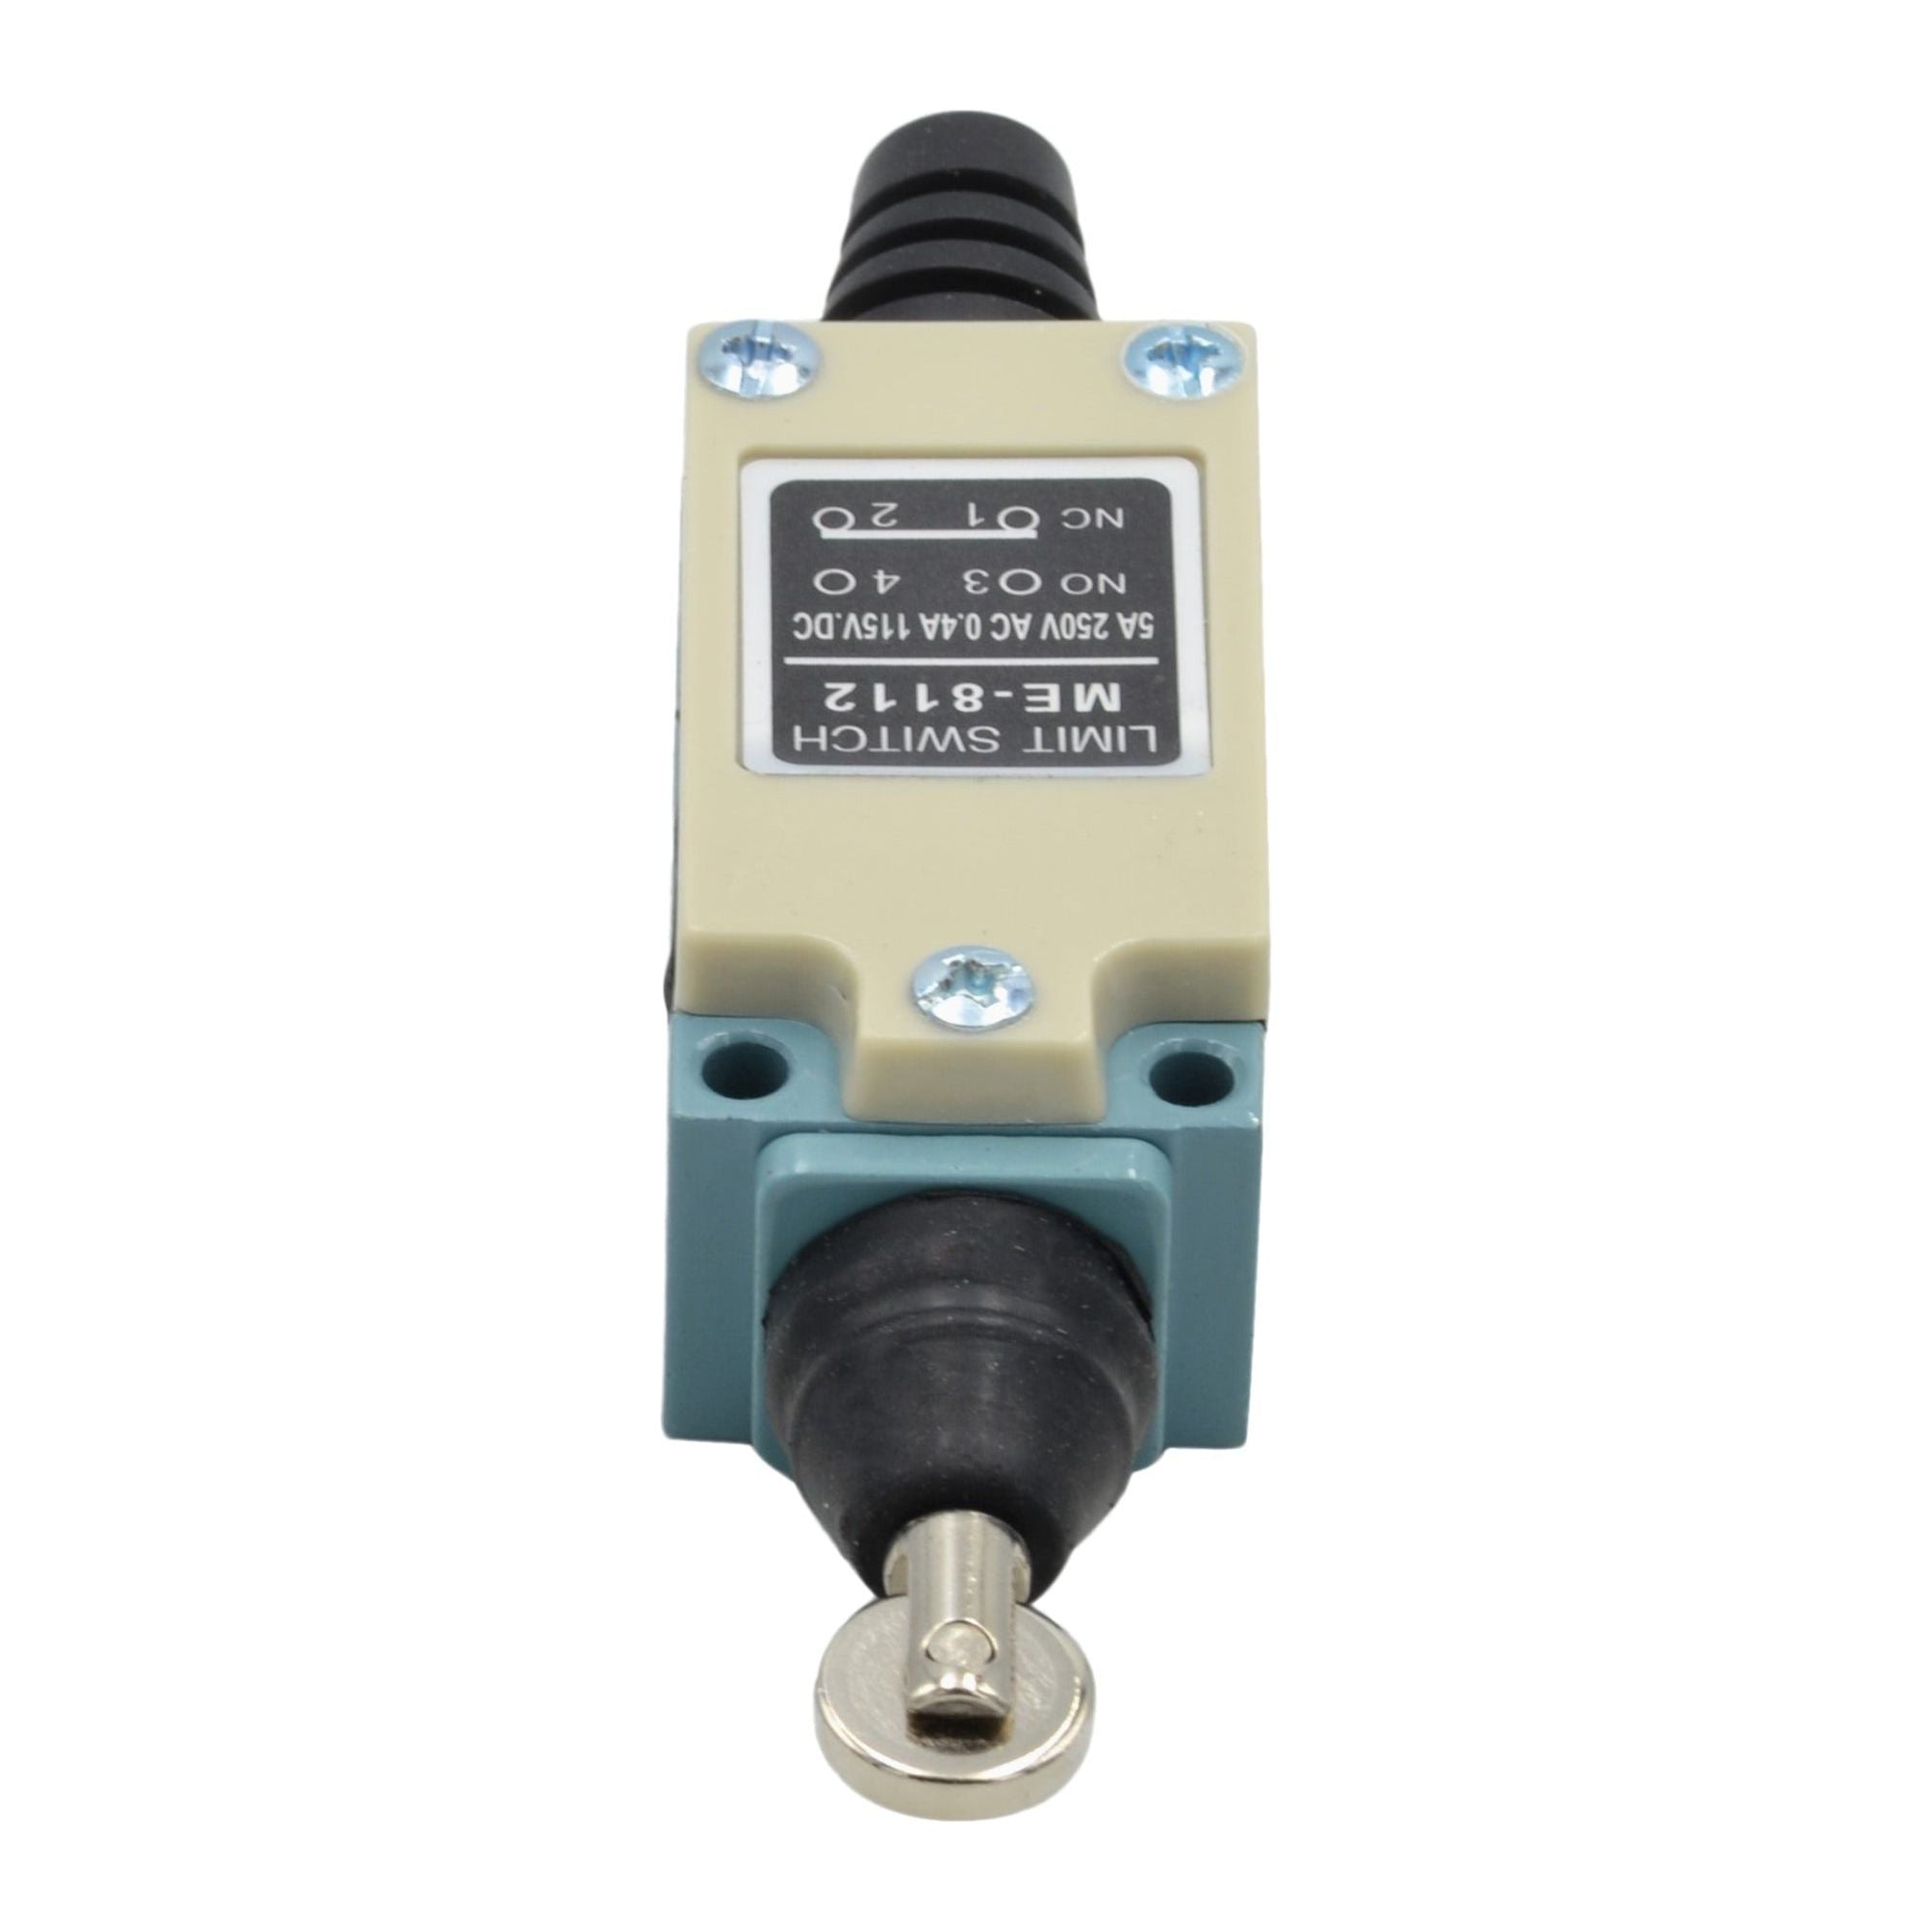 ME-8112 Cross Roller Plunger Momentary Limit Switch